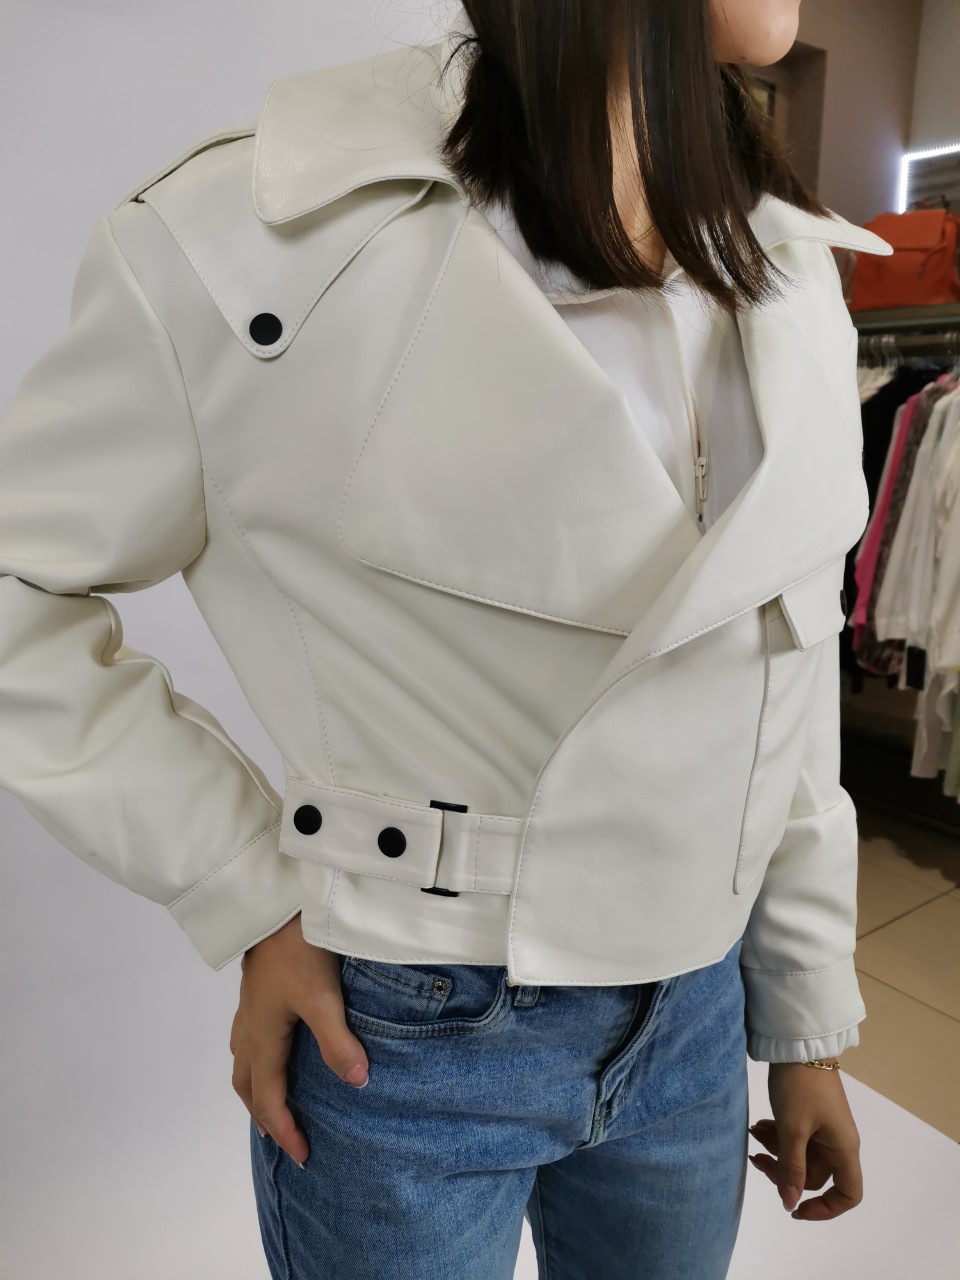 Short leatherette jacket in white color that fastens on the side